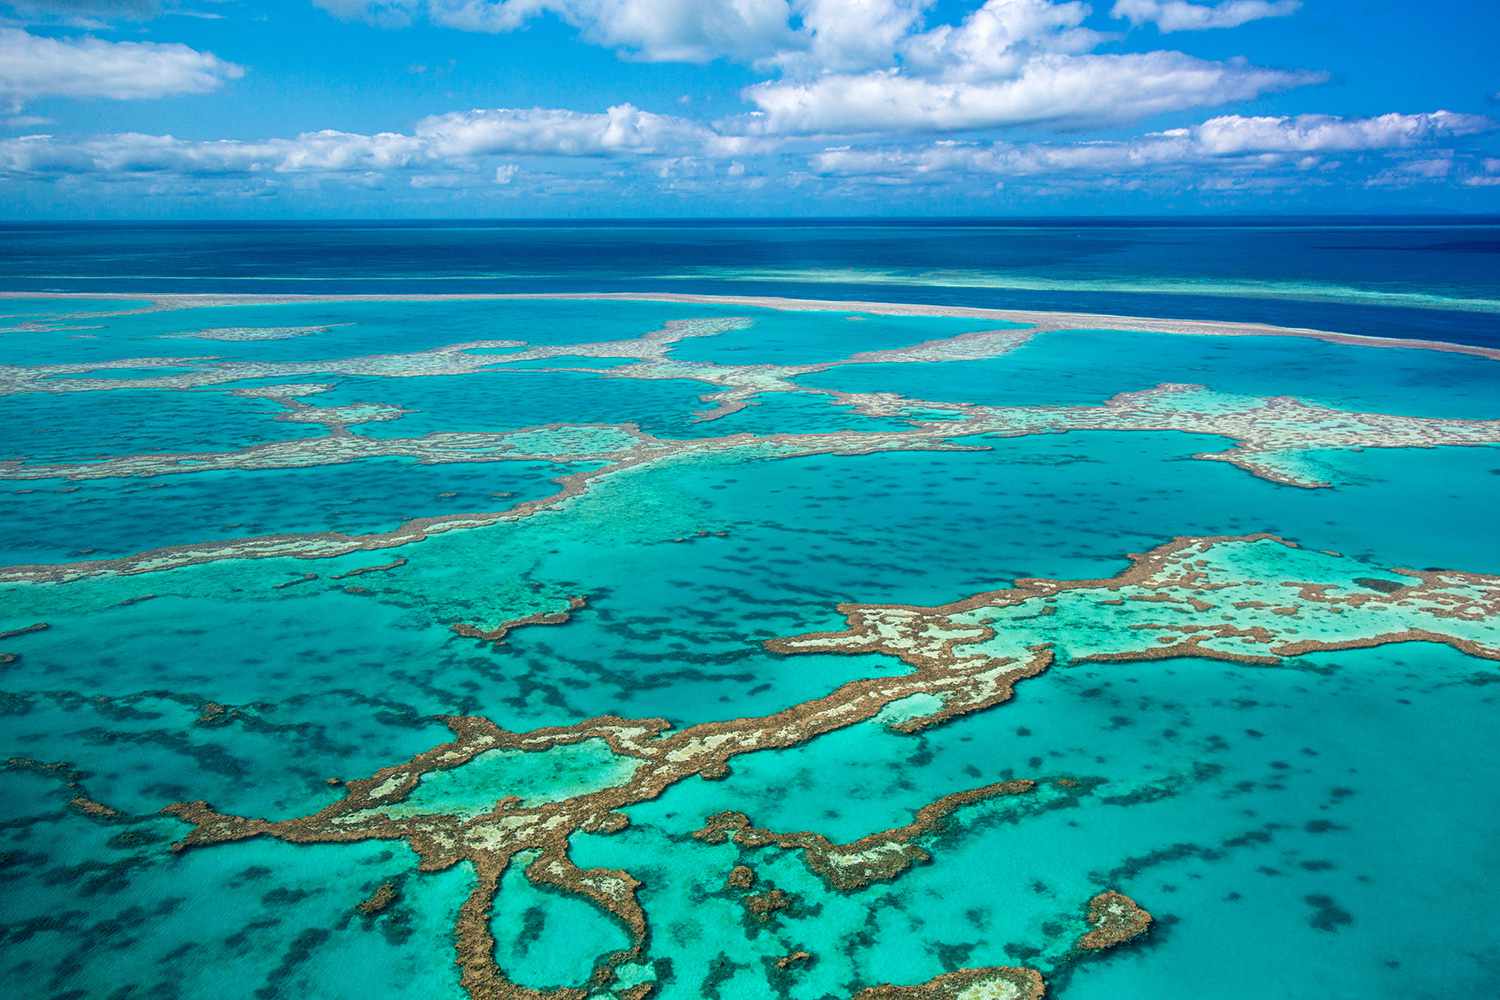 Explore the Great Barrier Reef in Australia